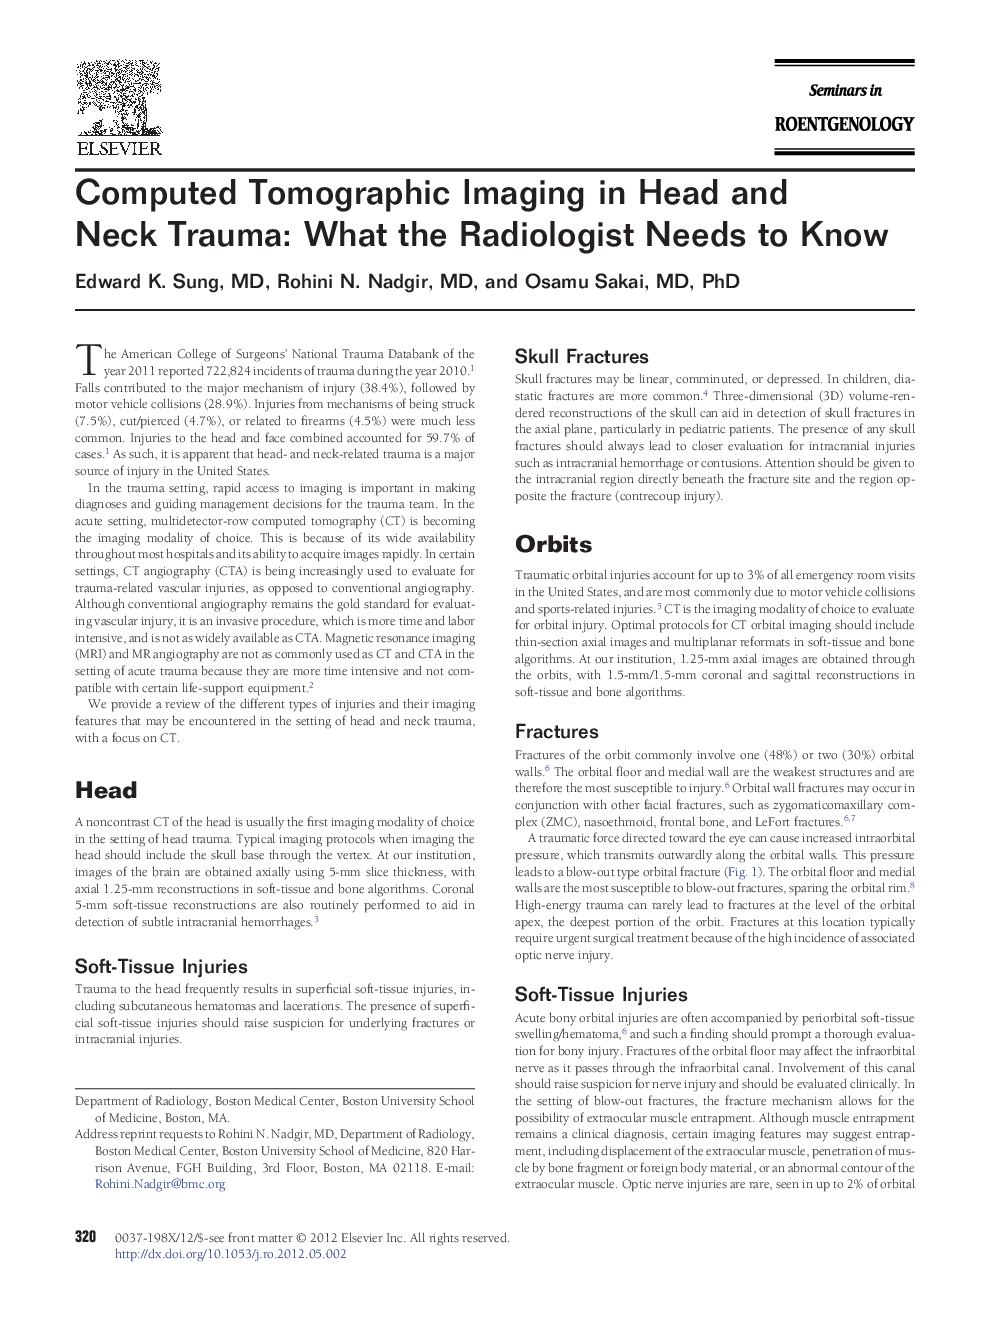 Computed Tomographic Imaging in Head and Neck Trauma: What the Radiologist Needs to Know